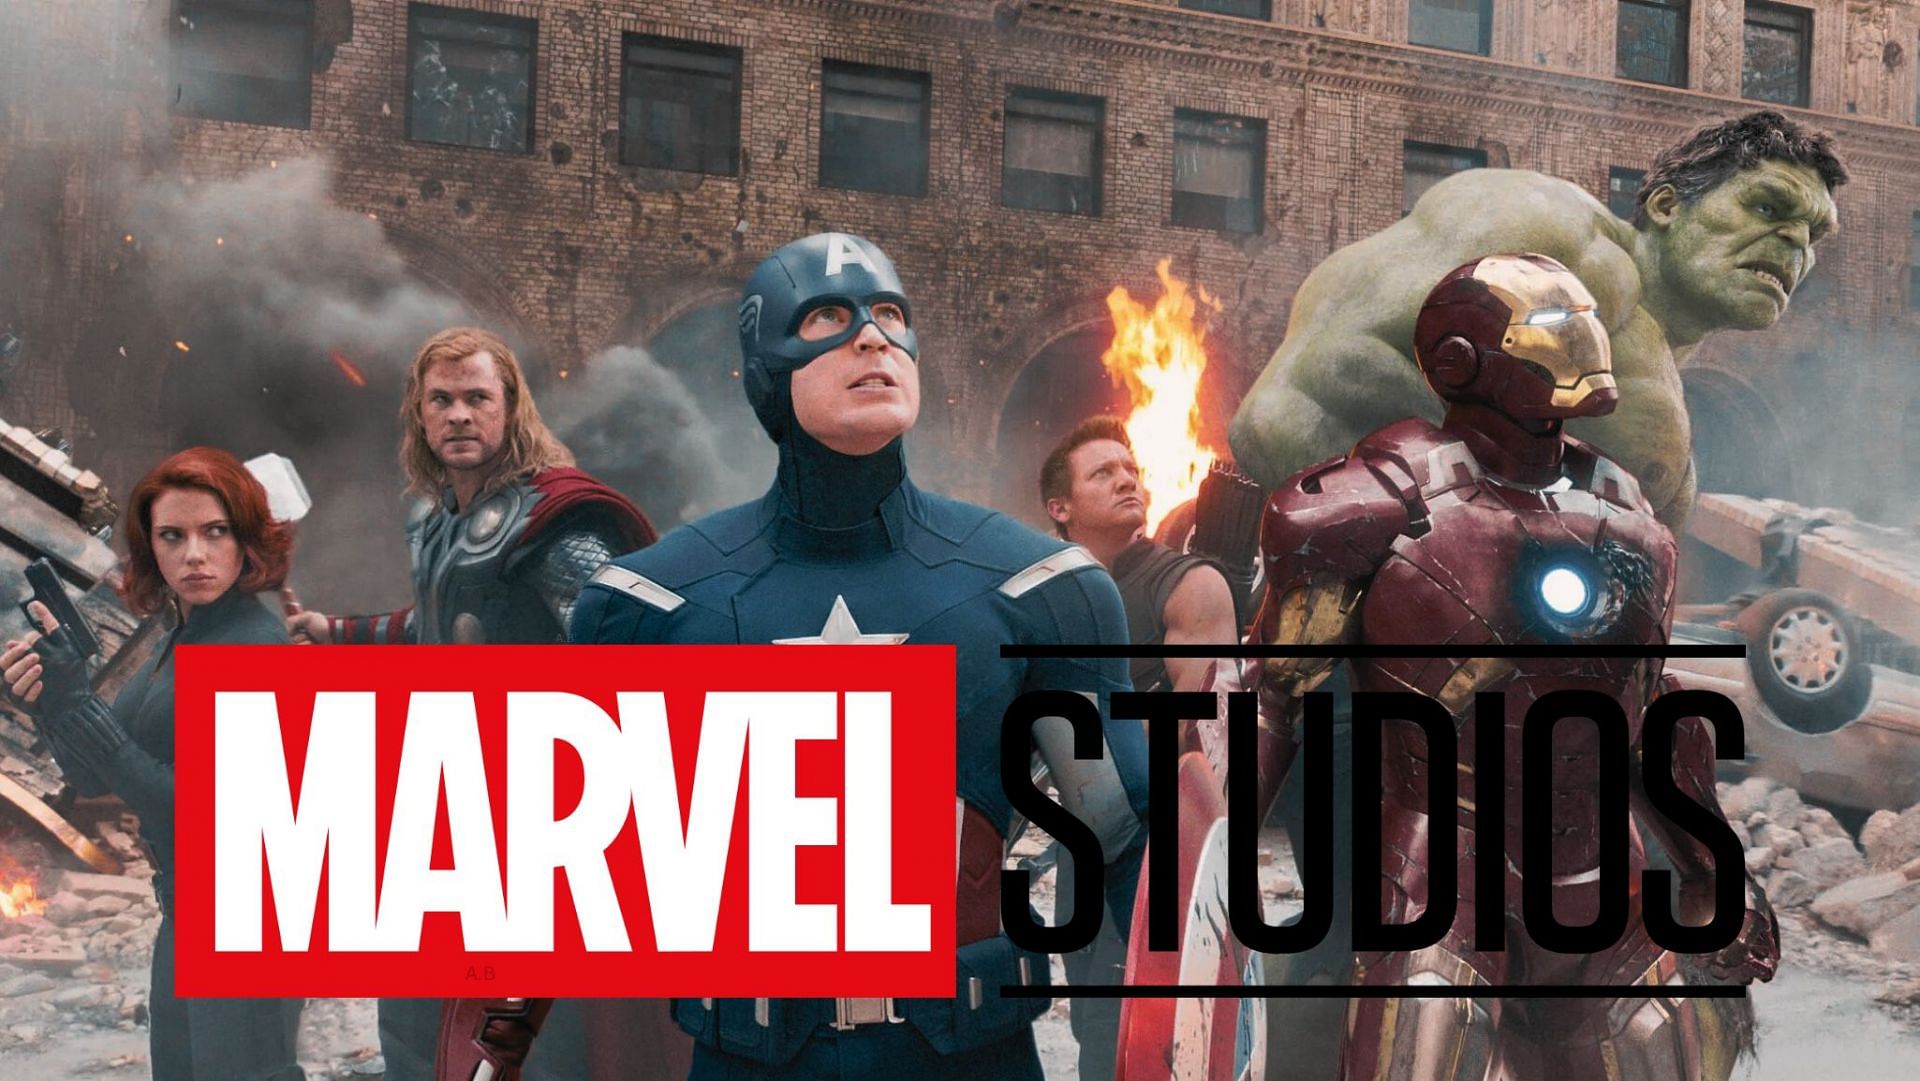 Phase 6 in turmoil: Release delays and uncertainty plague Marvel Cinematic Universe (Image via Marvel Studios)